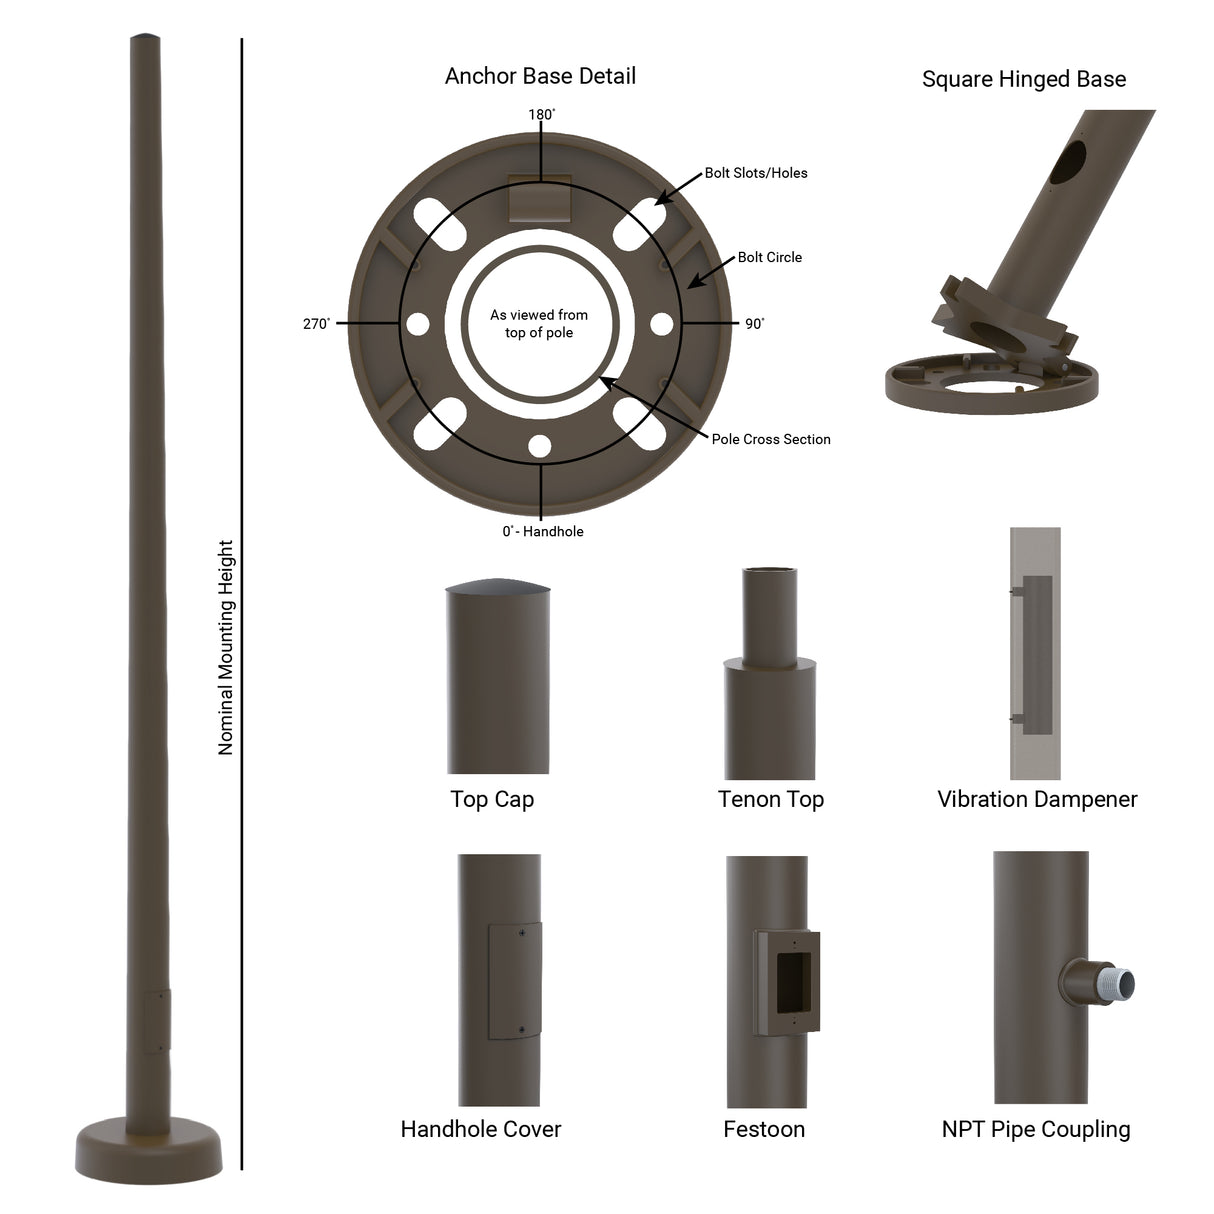 14' Tall x 5.0" Base OD x 3.0" Top OD x 0.156" Thick, Round Tapered Aluminum, Hinged Anchor Base Light Pole